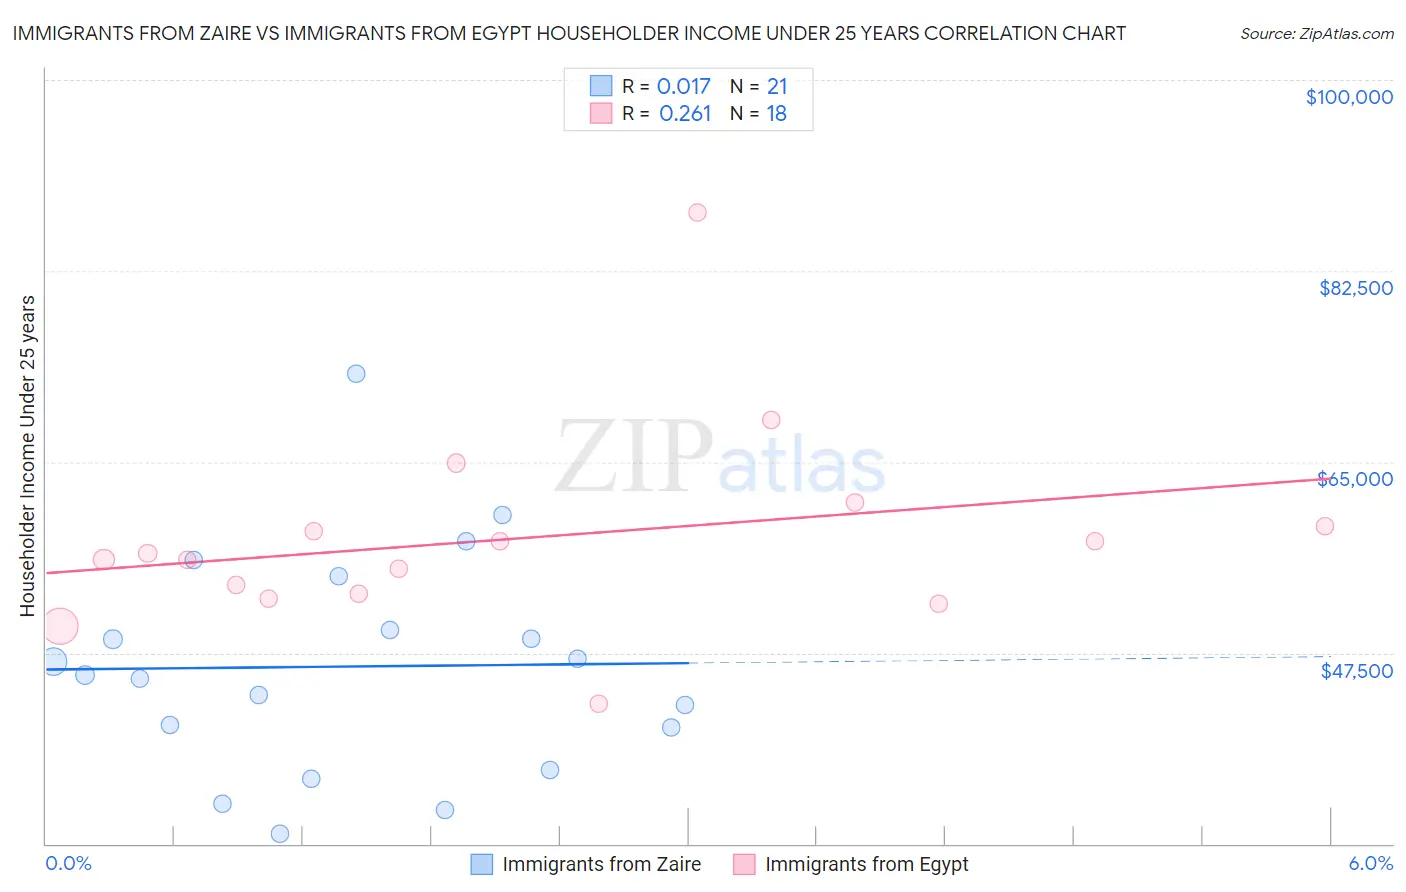 Immigrants from Zaire vs Immigrants from Egypt Householder Income Under 25 years